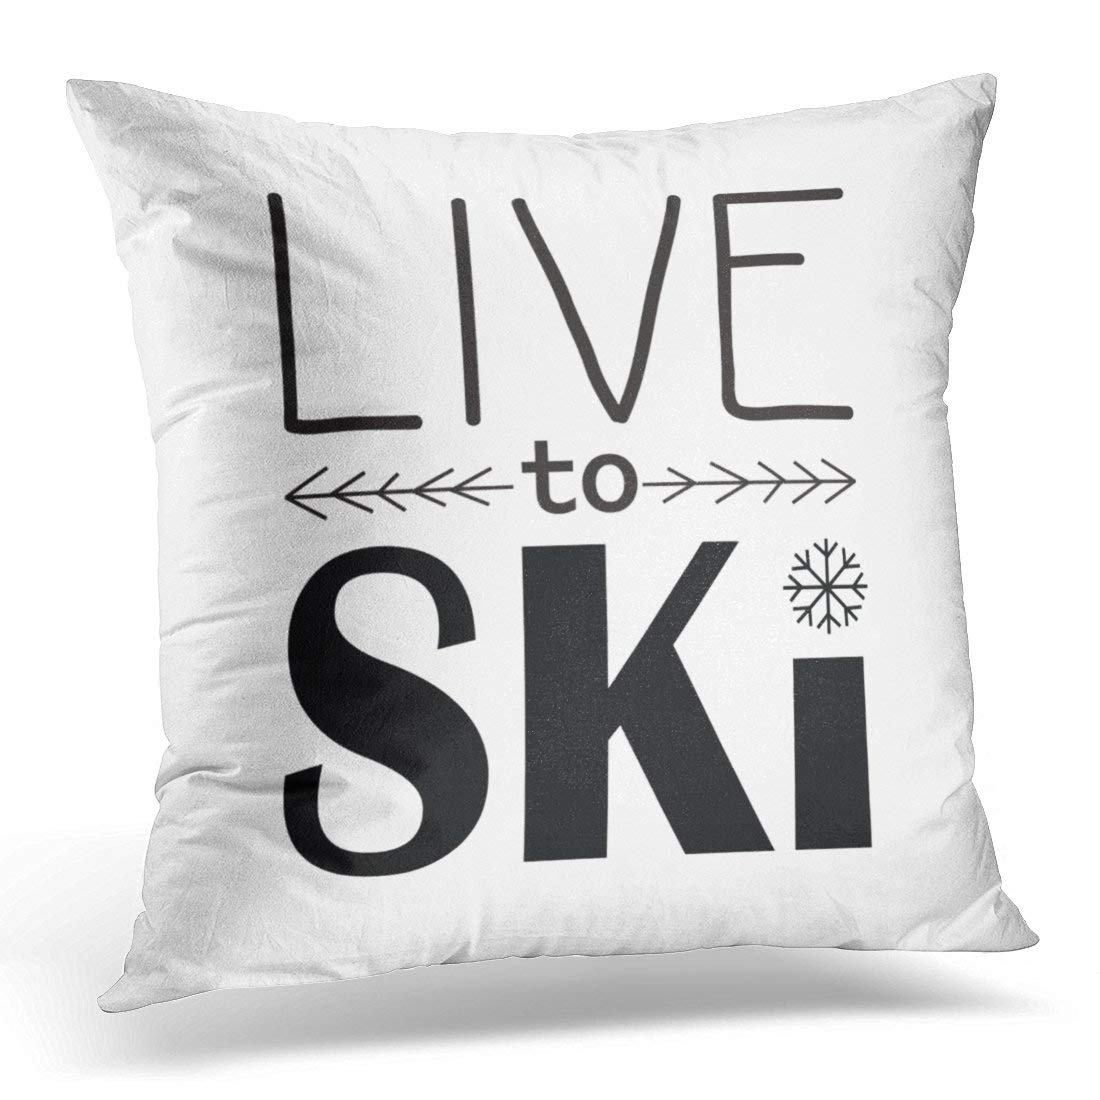 Multicolor Ski Gift Winter Sports And Skiing Present Goggles Skier Design Skiing Throw Pillow 18x18 